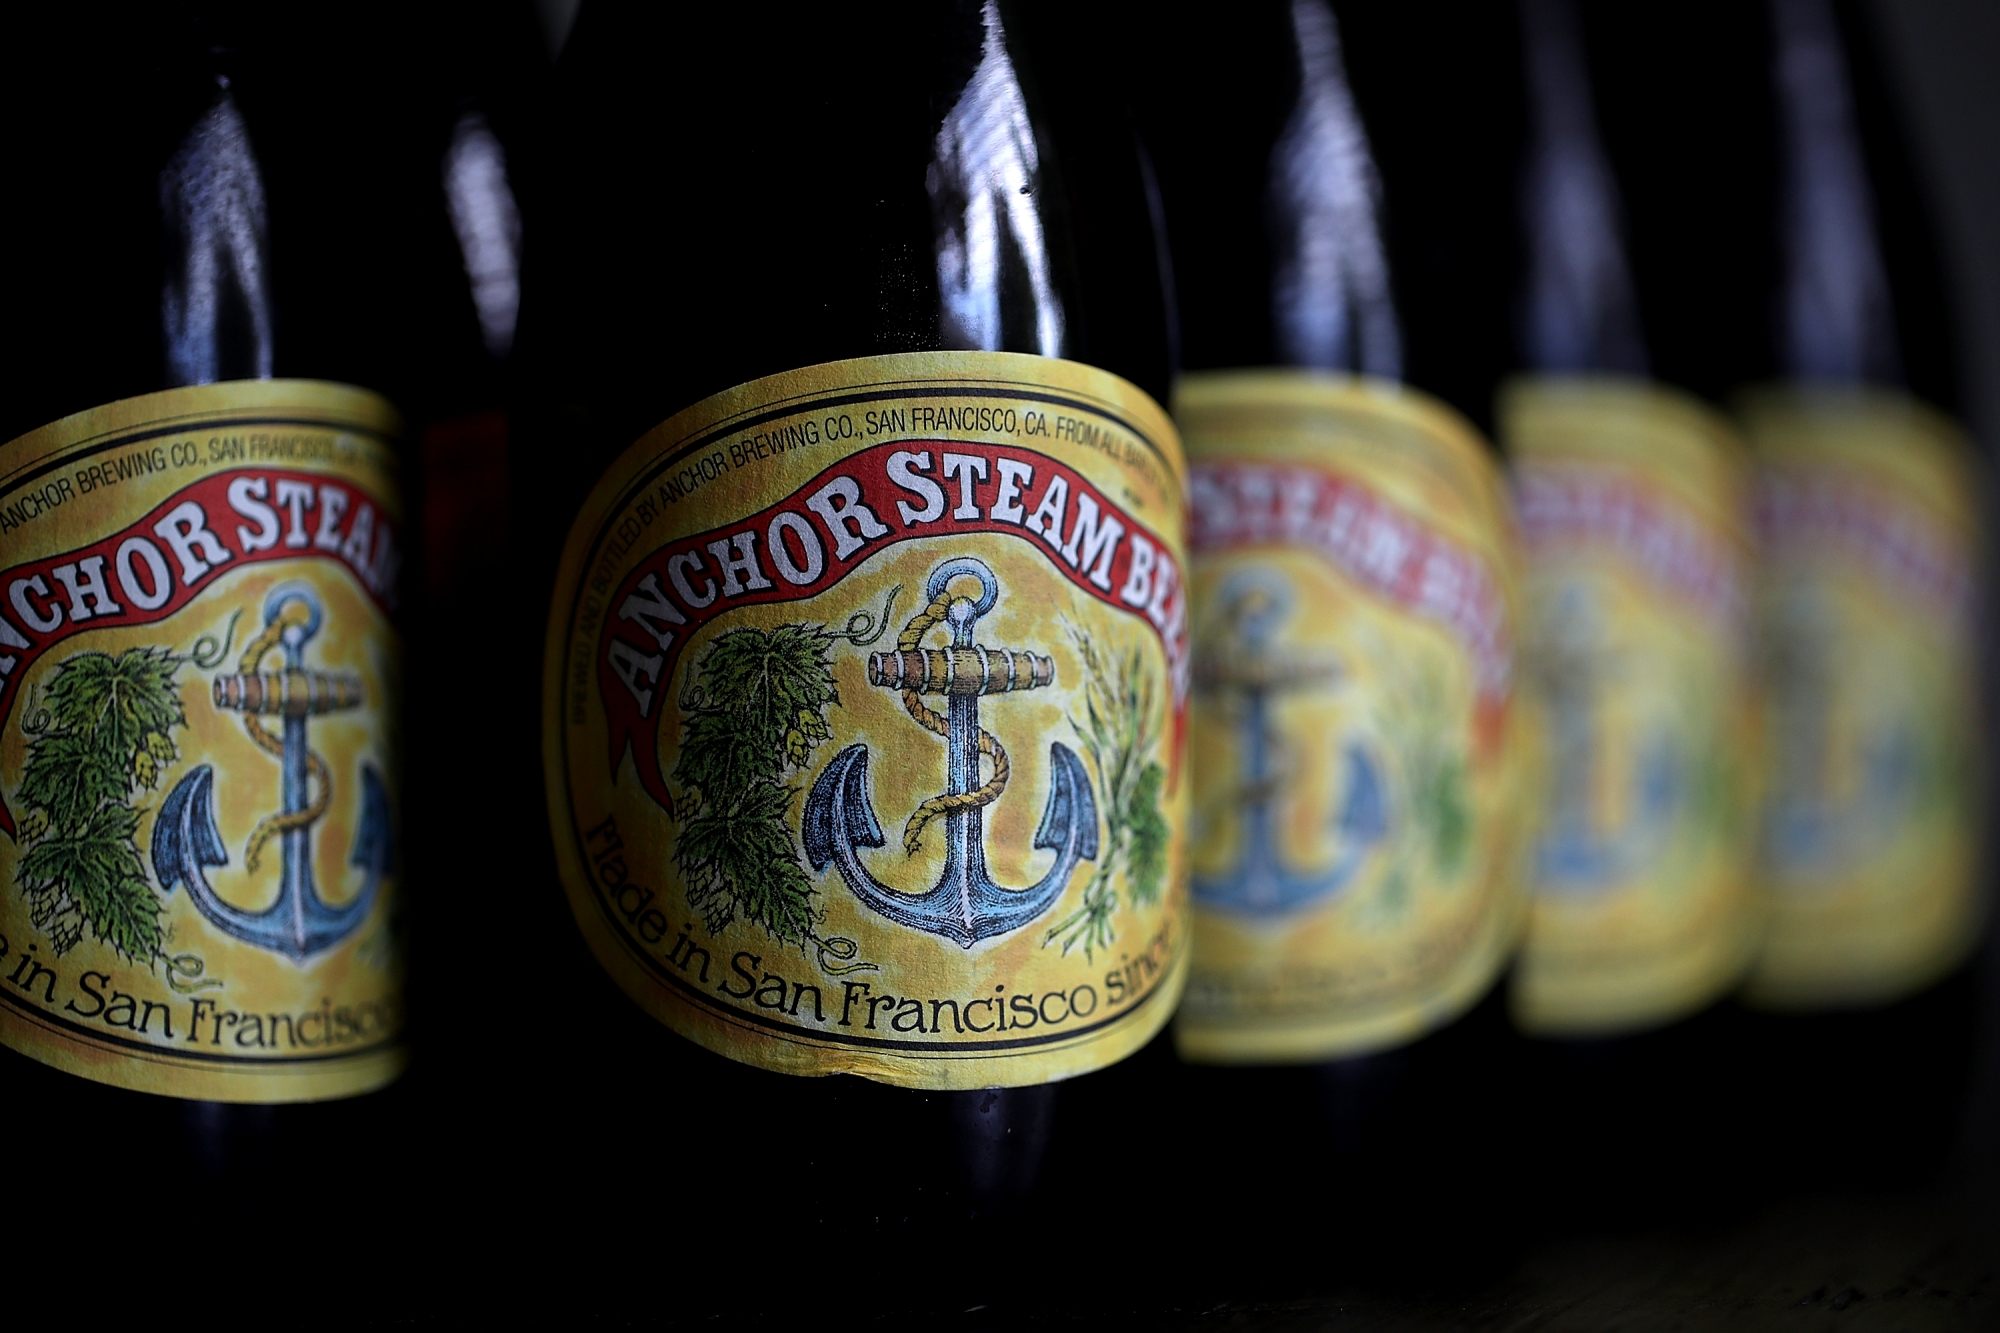 SAN ANSELMO, CA - AUGUST 03: Bottles of Anchor Steam beer are displayed on August 3, 2017 in San Anselmo, California. San Francisco based Anchor Brewing announced plans to sell to JapanÕs Sapporo Holdings Ltd for an undisclosed amount. Anchor Steam has brewed in San Francisco for 121 years. (Photo Illustration by Justin Sullivan/Getty Images)